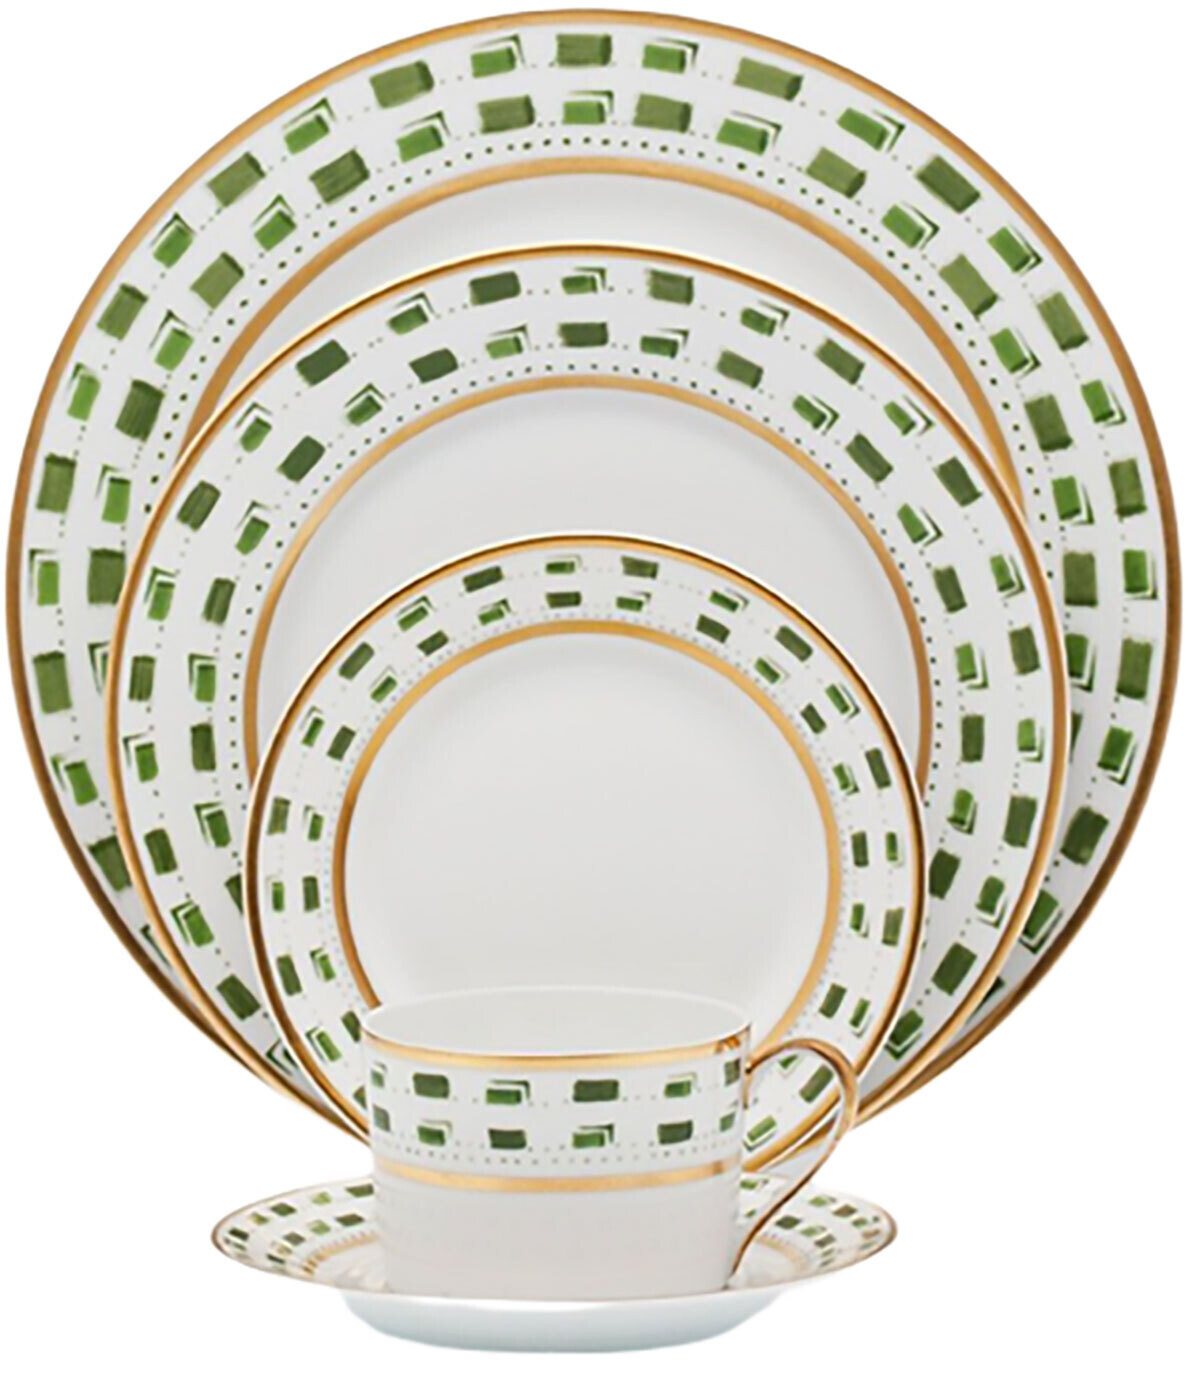 Royal Limoges La Bocca Green Shallow Salad Pasta Plate 8.5 Inch A220-COU20663